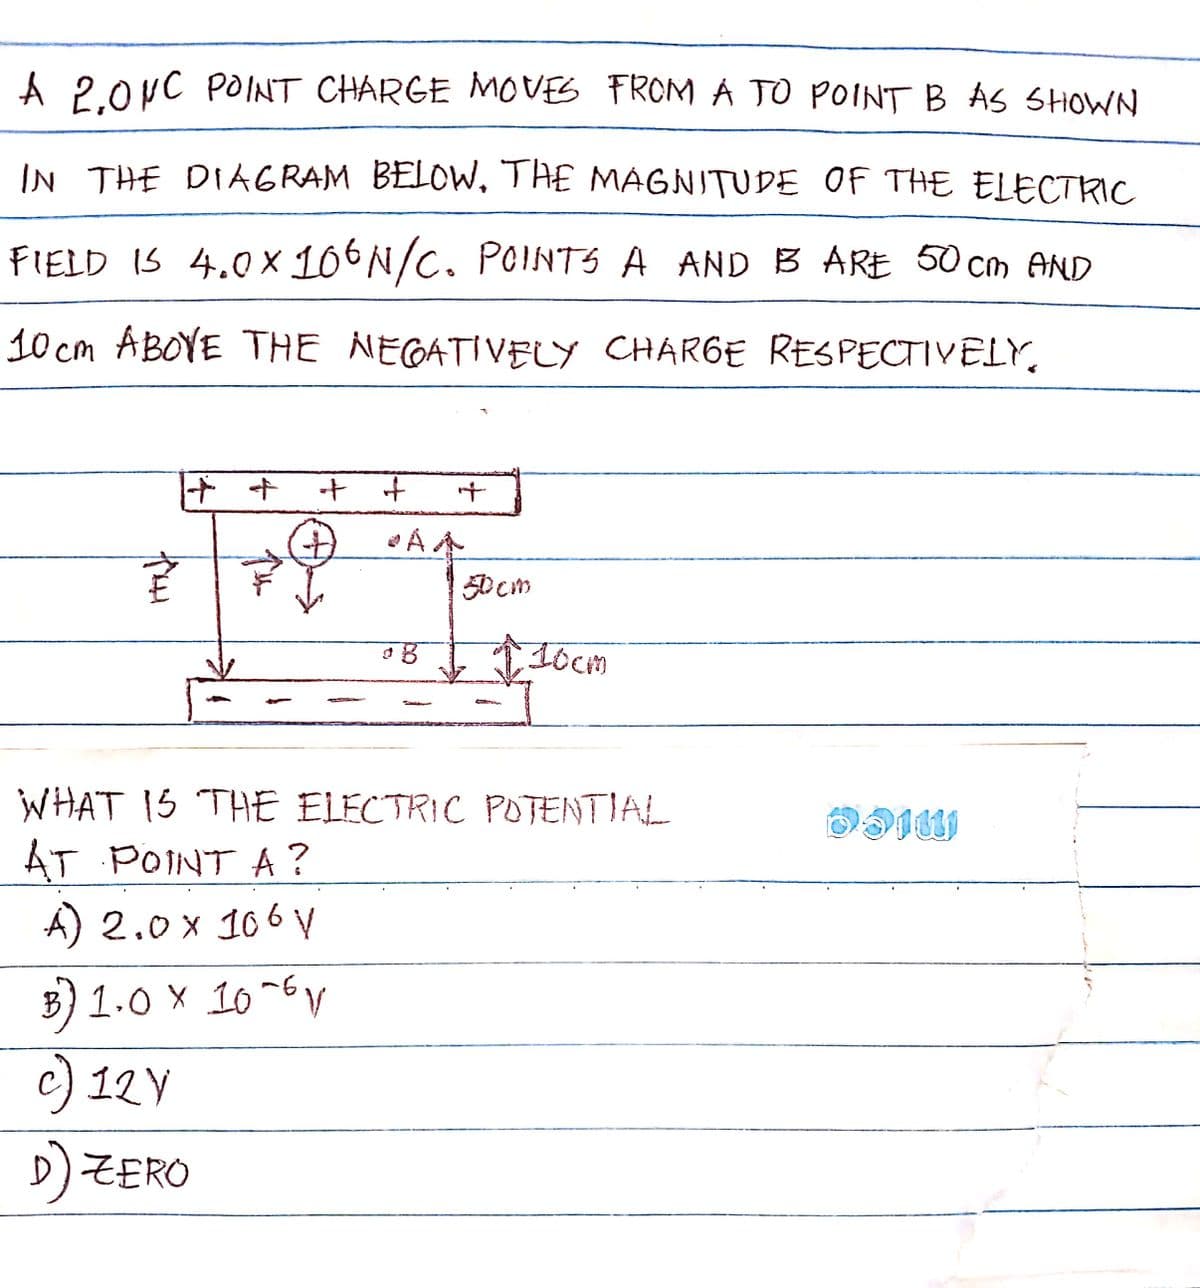 A 2,0NC POINT CHARGE MOVES FROM A TO POINT B AS SHOWN
IN THE DIAGRAM BELOW. THE MAGNITUDE OF THE ELECTRIC
FIELD IS 4.0x106N/C. POINTS A AND IB ARE 50cm AND
10cm ABOVE THE NEGATIVELY CHARGE RESPECTIVELY,
Tou
++
+₁ +
+
+
AA
B
50om
10cm
WHAT IS THE ELECTRIC POTENTIAL
AT POINT A?
A) 2.0 x 106 V
B) 1.0 x 10-6 V
c) 12 V
D) ZERO